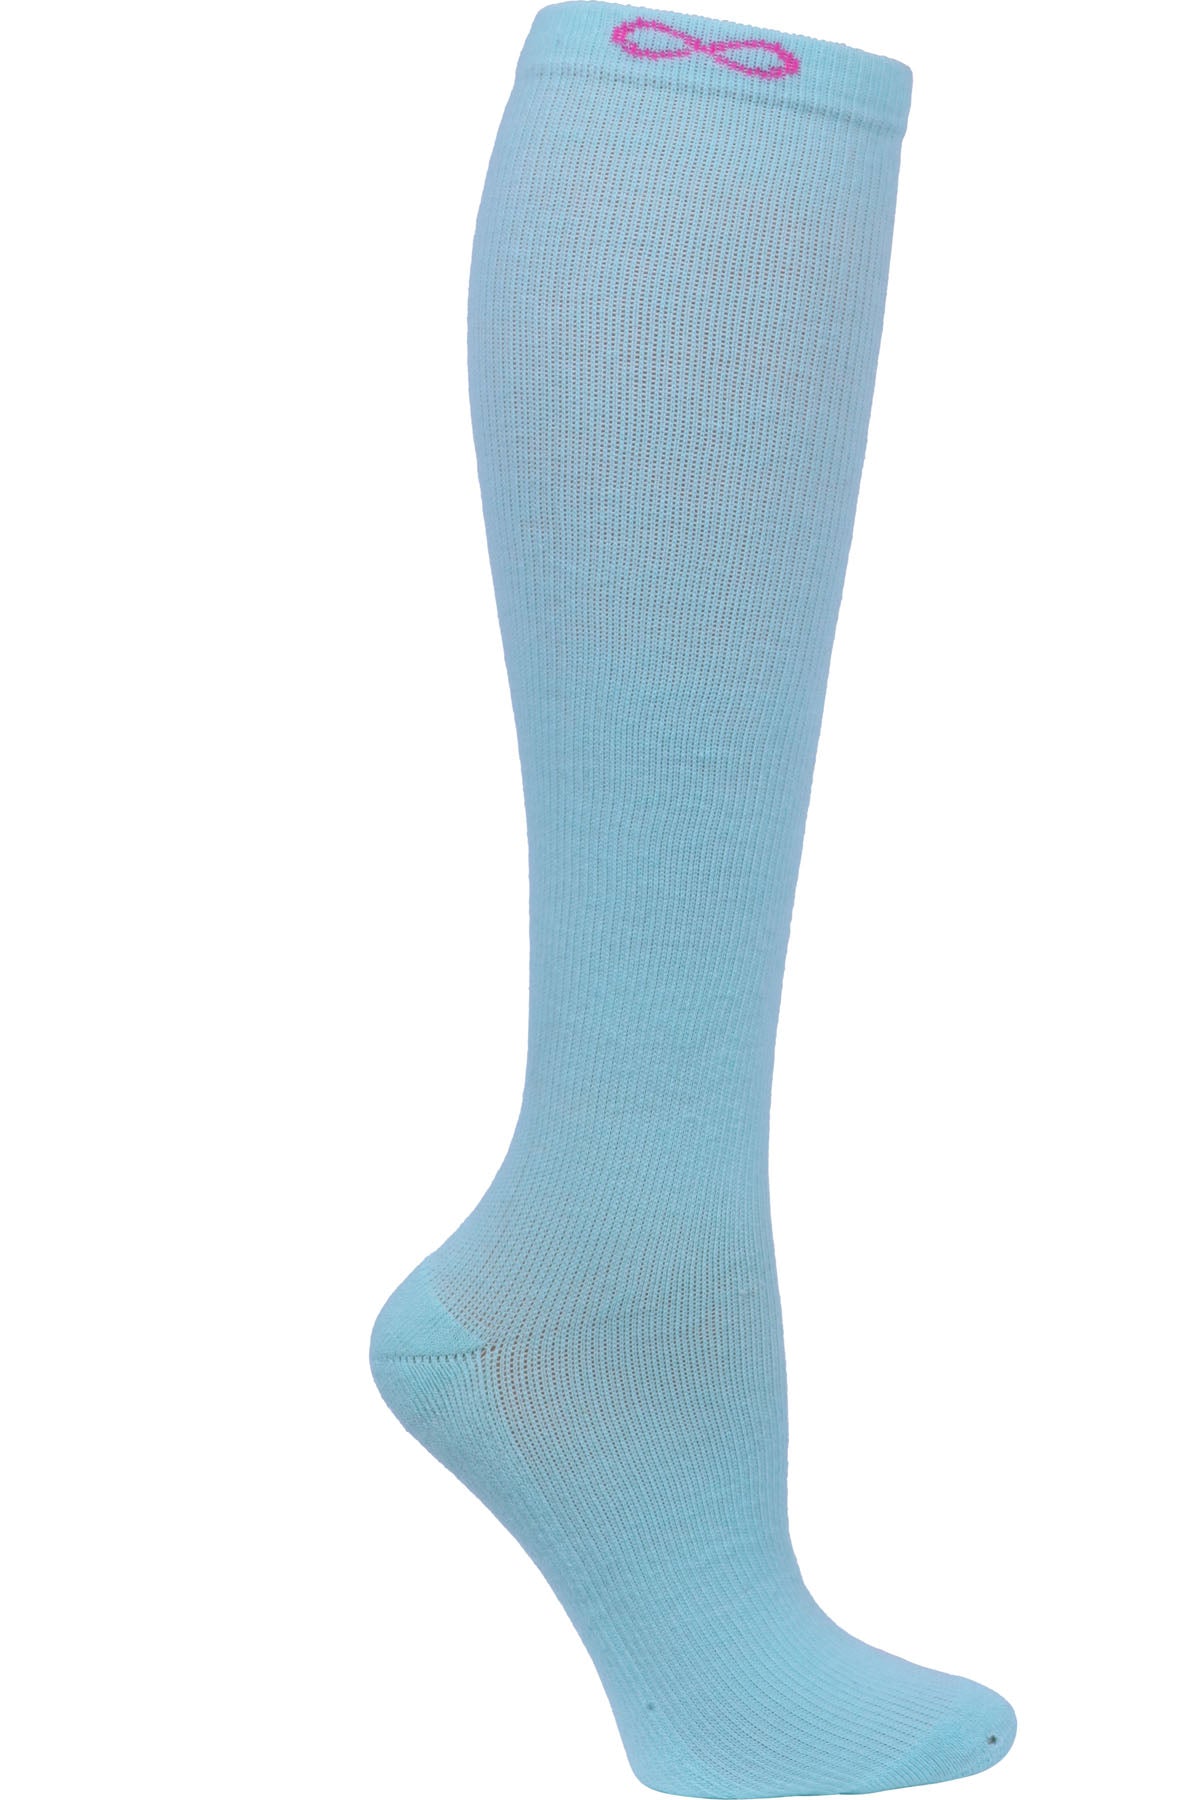 Cherokee Moderate Compression Socks Infinity Kickstart 15-20 mmHg Sea Salt at Parker's Clothing and Shoes.